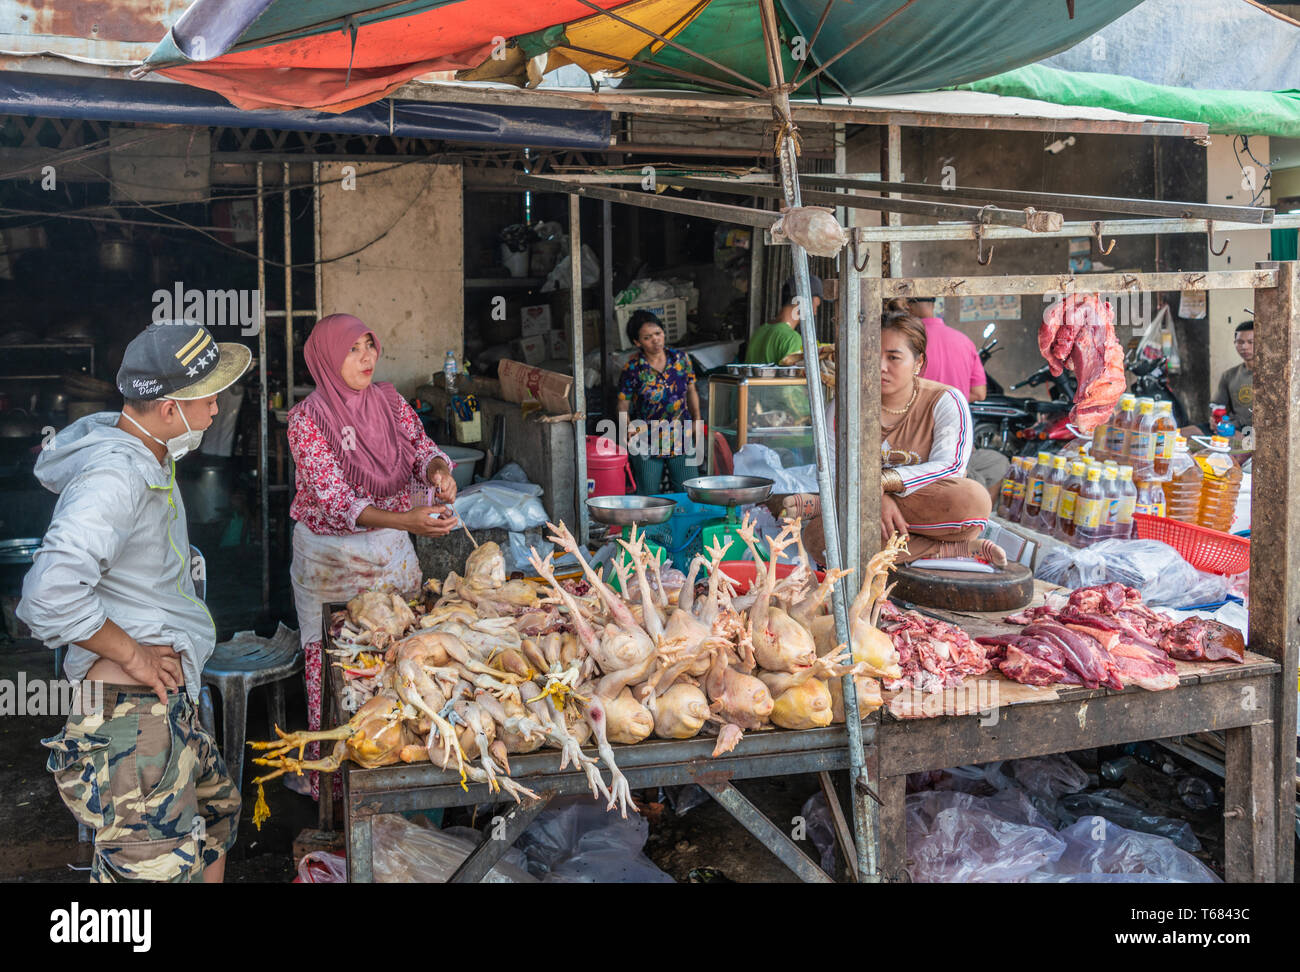 Sihanoukville, Cambodia - March 15, 2019: Phsar Leu Market. Pink Hijab wearing Female butcher sells off pile of dead chickens in booth. Other merchant Stock Photo